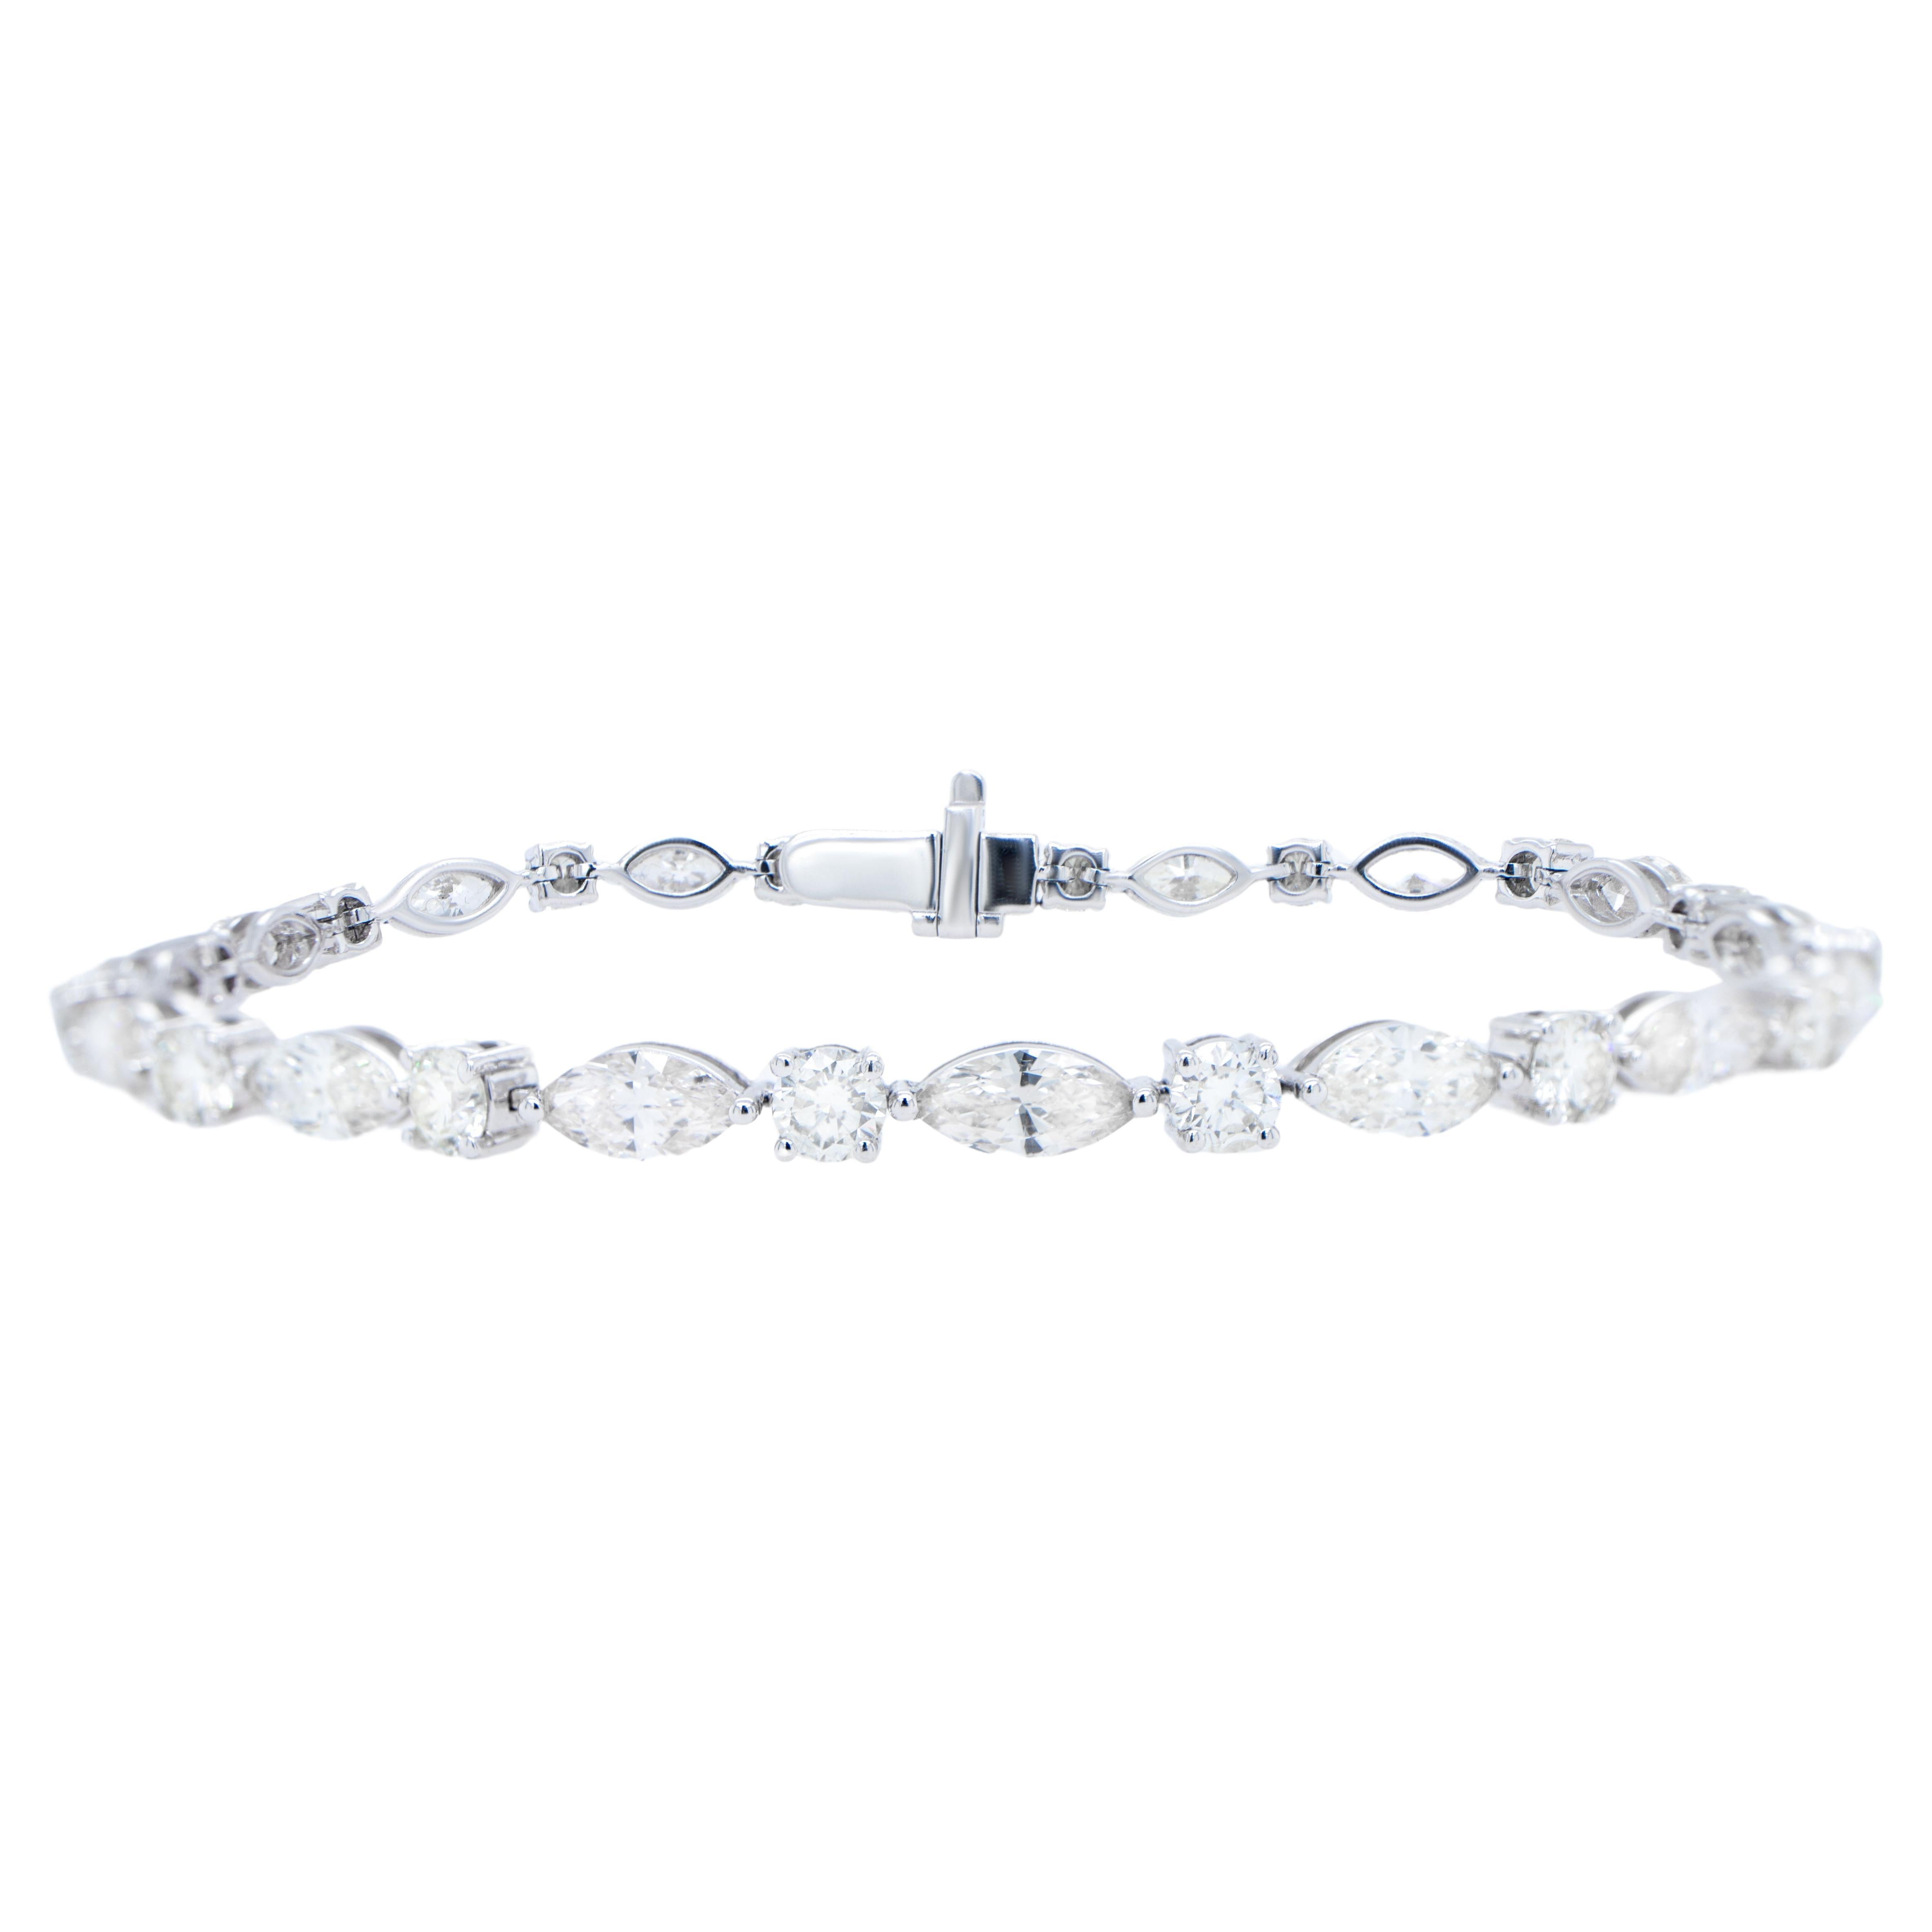 IDL Certified Diamond Tennis Bracelet Marquise and Round Cut 7.38 Carats 18K